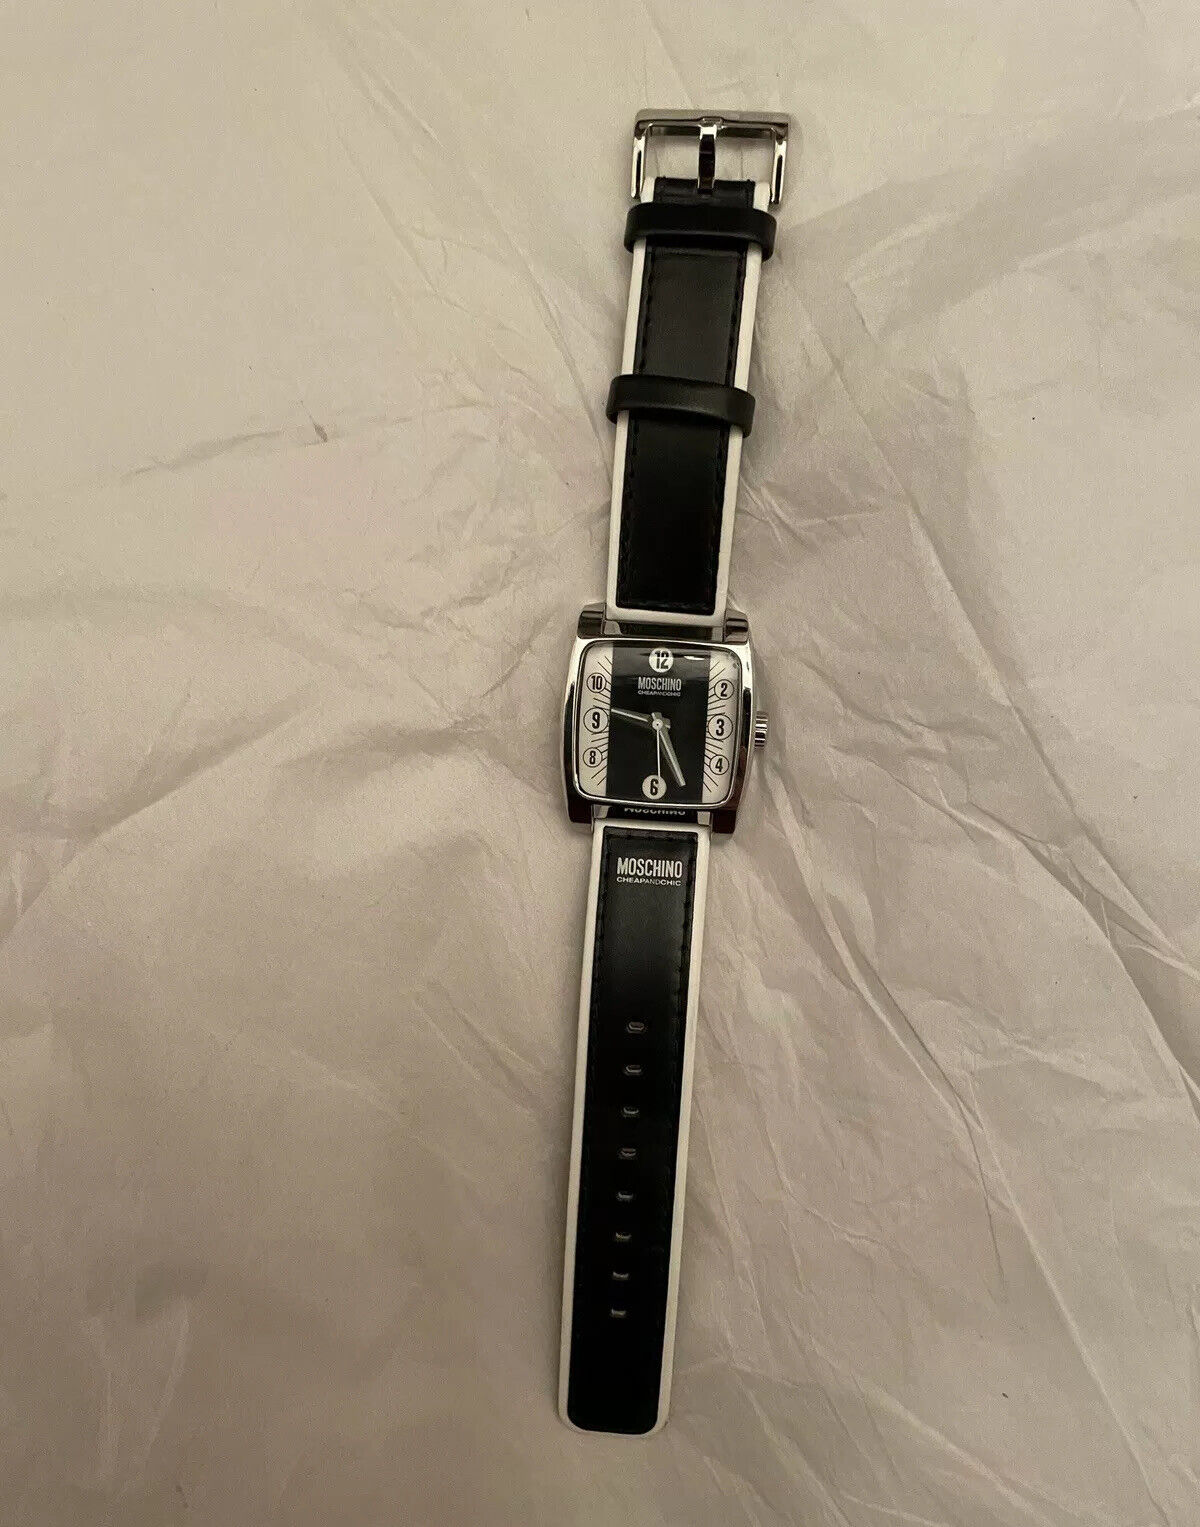 New Moschino Cheap & Chic Black & White Wrist Watch With A Genuine Leather Strap